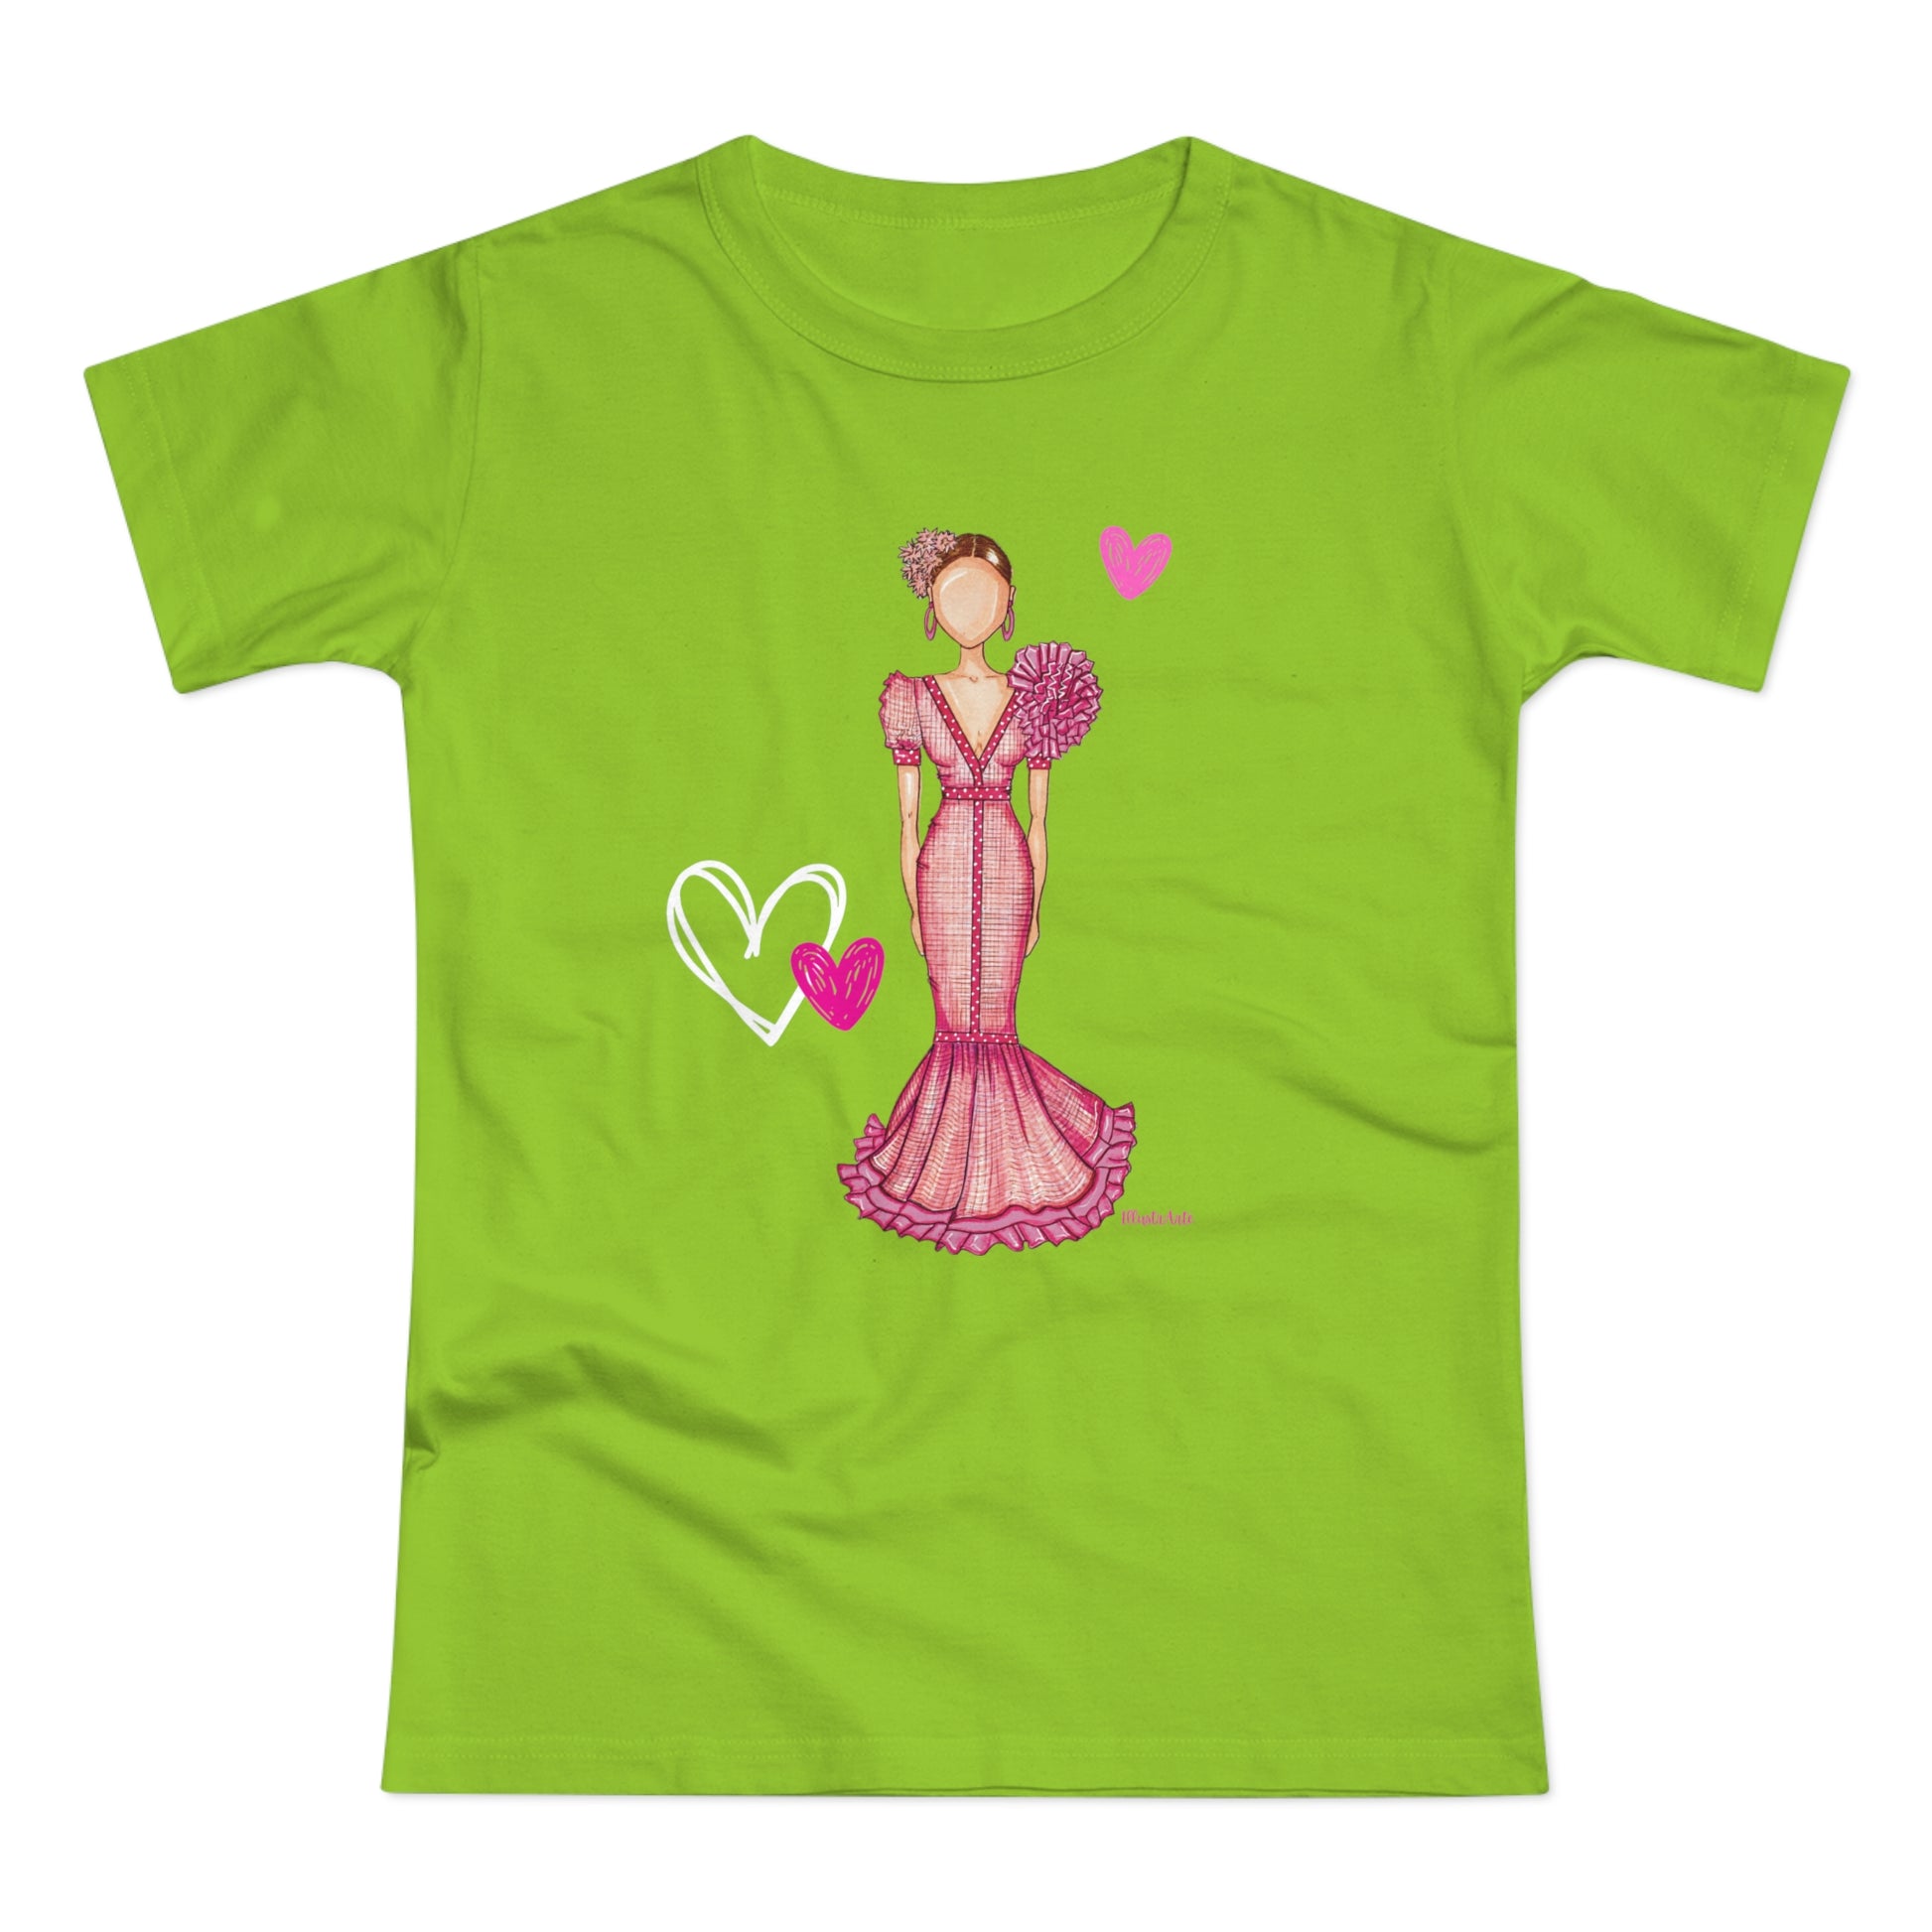 a green t - shirt with a picture of a woman in a pink dress